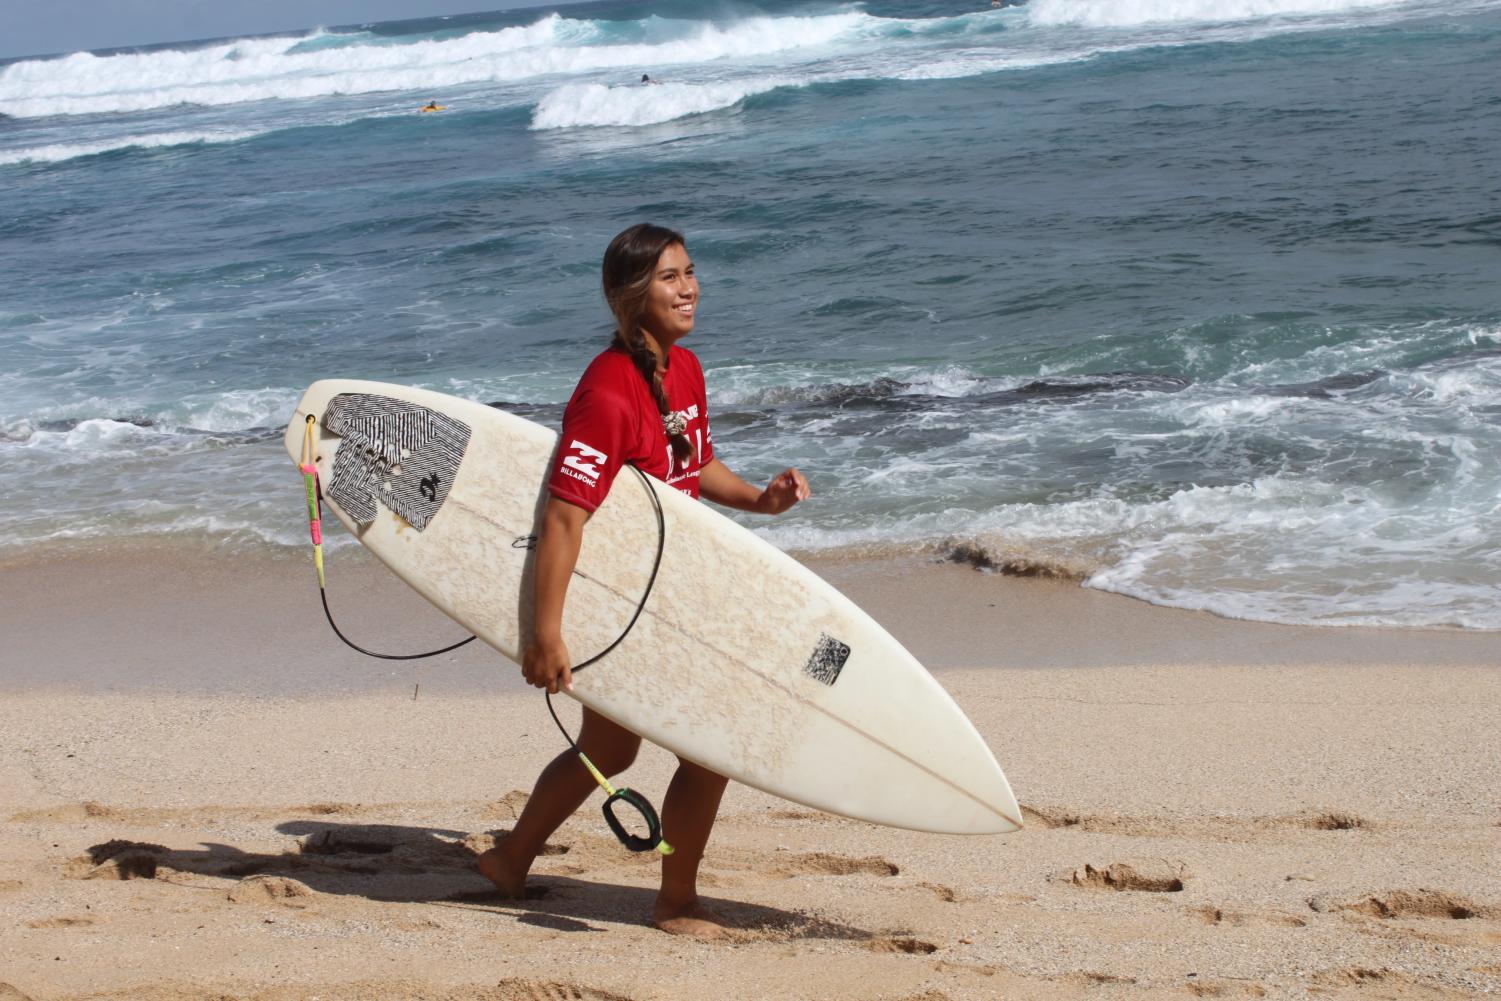 Surfing: Luat-Hueu, Roback place second in MIL